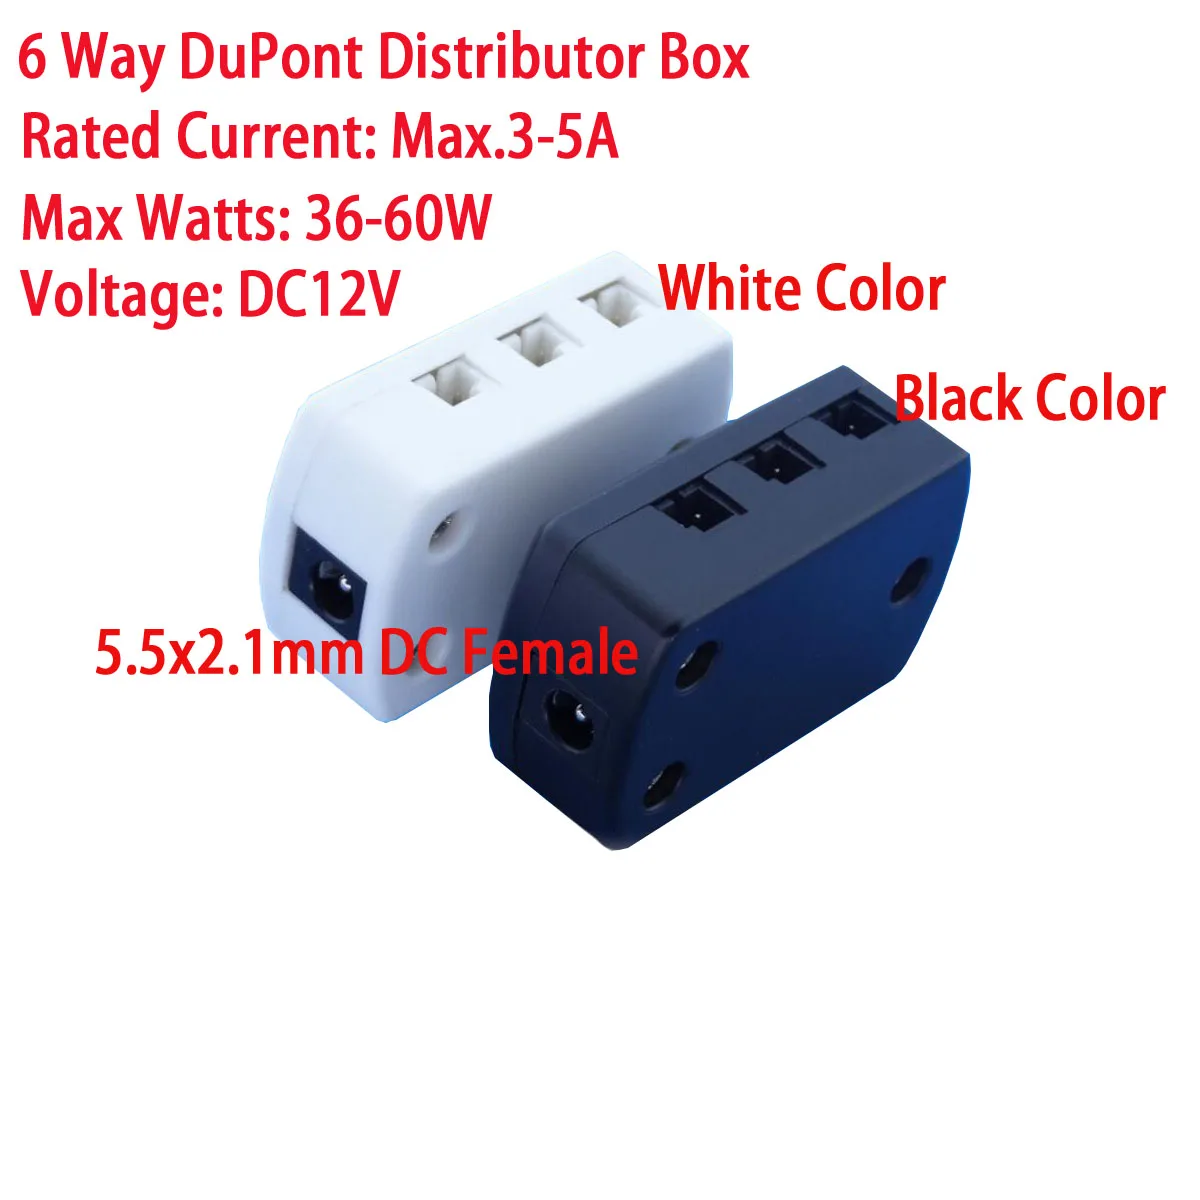 

6 Way DuPont Distributor Box 5.5x2.1mm DC Female including 2M Lenght Male Cable for Single Color LEDs 6 Way DuPon